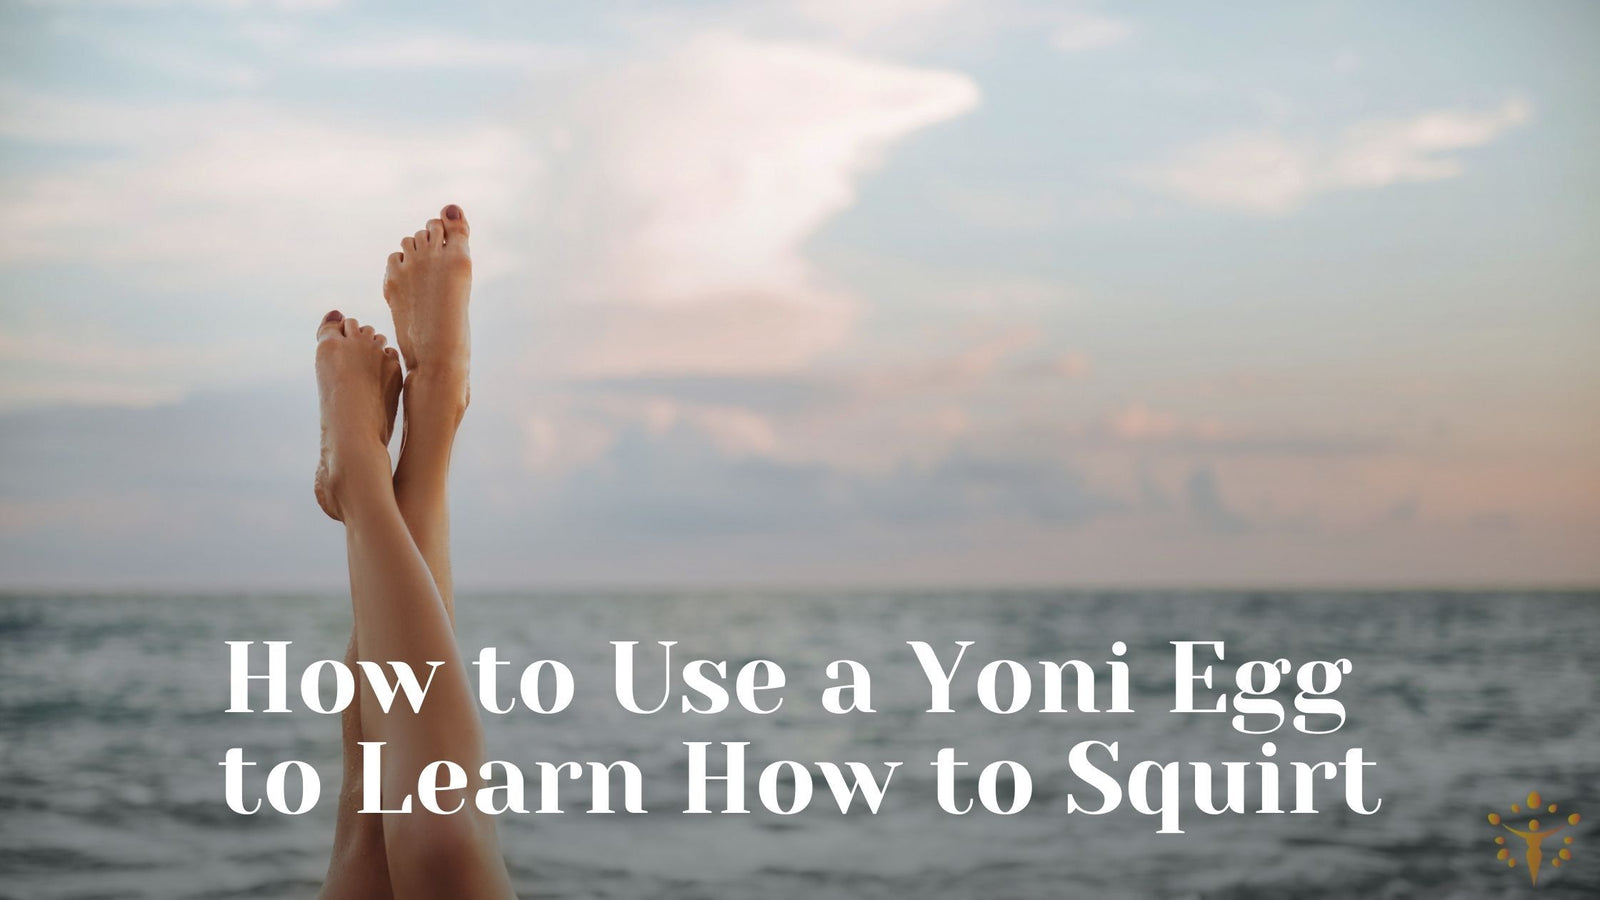 brent sievers recommends how to learn to squirt pic